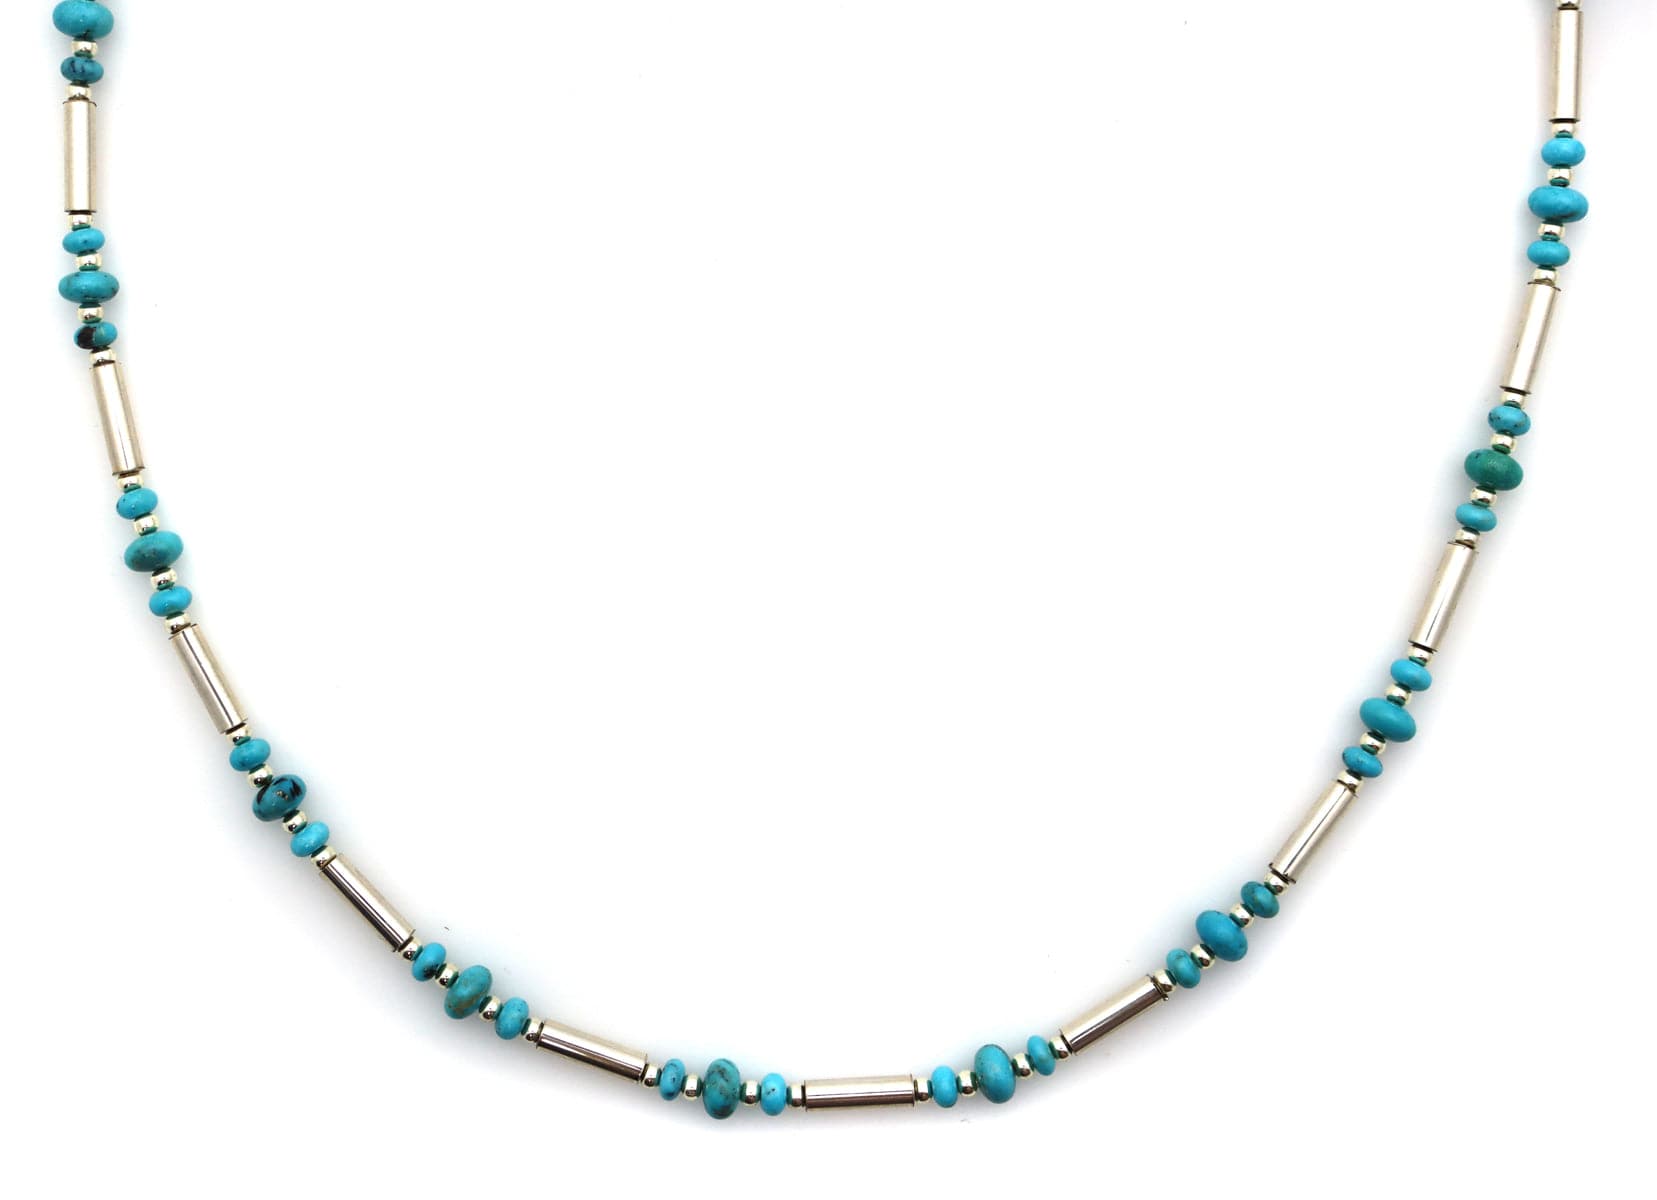 Frank Patania, Jr. - Turquoise and Sterling Silver Beaded Necklace, 30" length (J91620A-0221-017)2